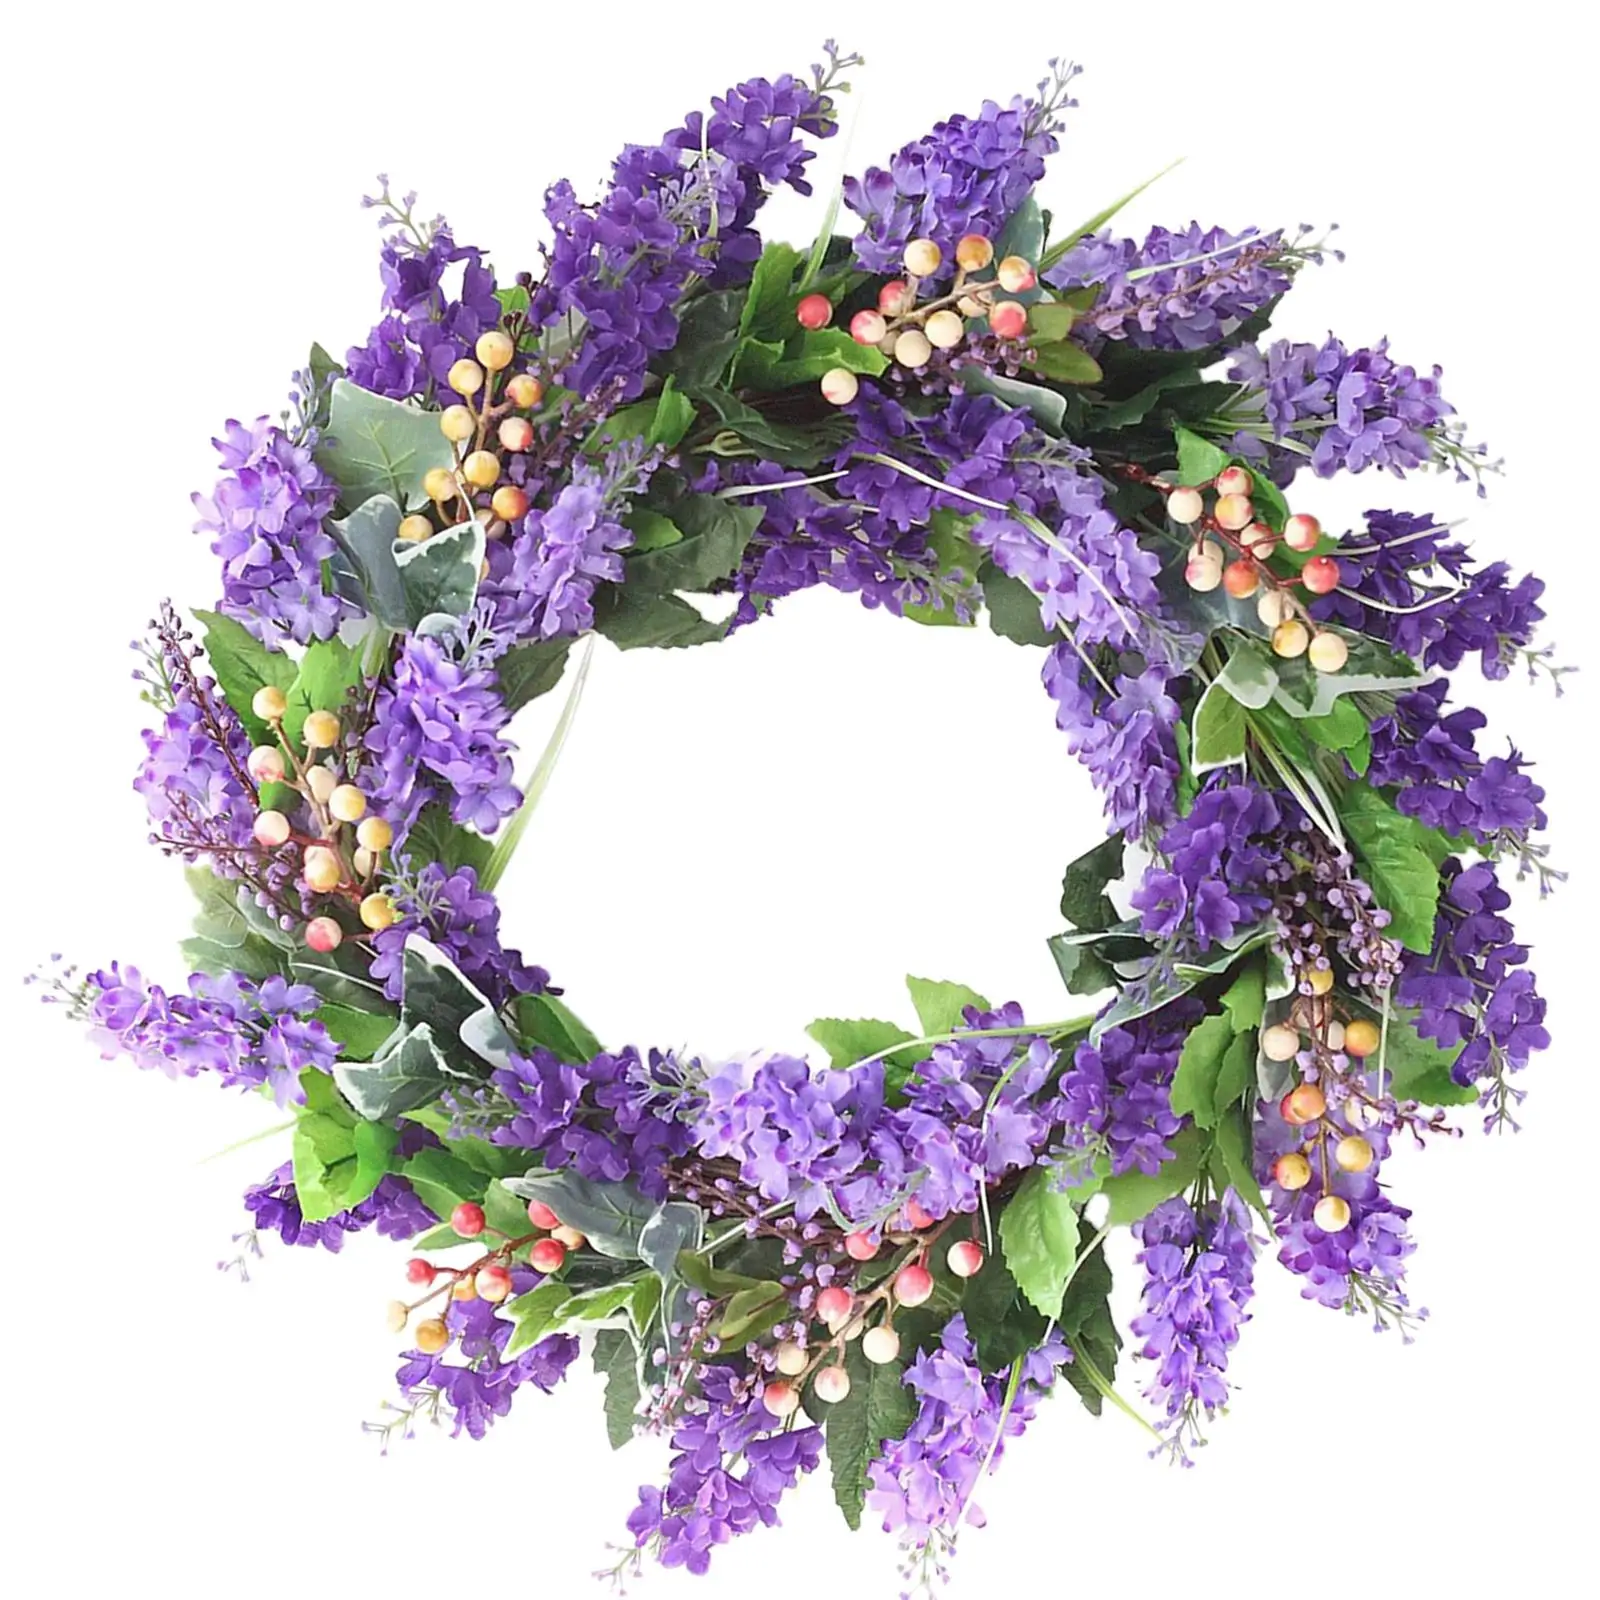 Lavender Wreath Artificial Flower Wreaths for Front Door Garden Wall Hanging Ornament Wedding Party Home Decoration